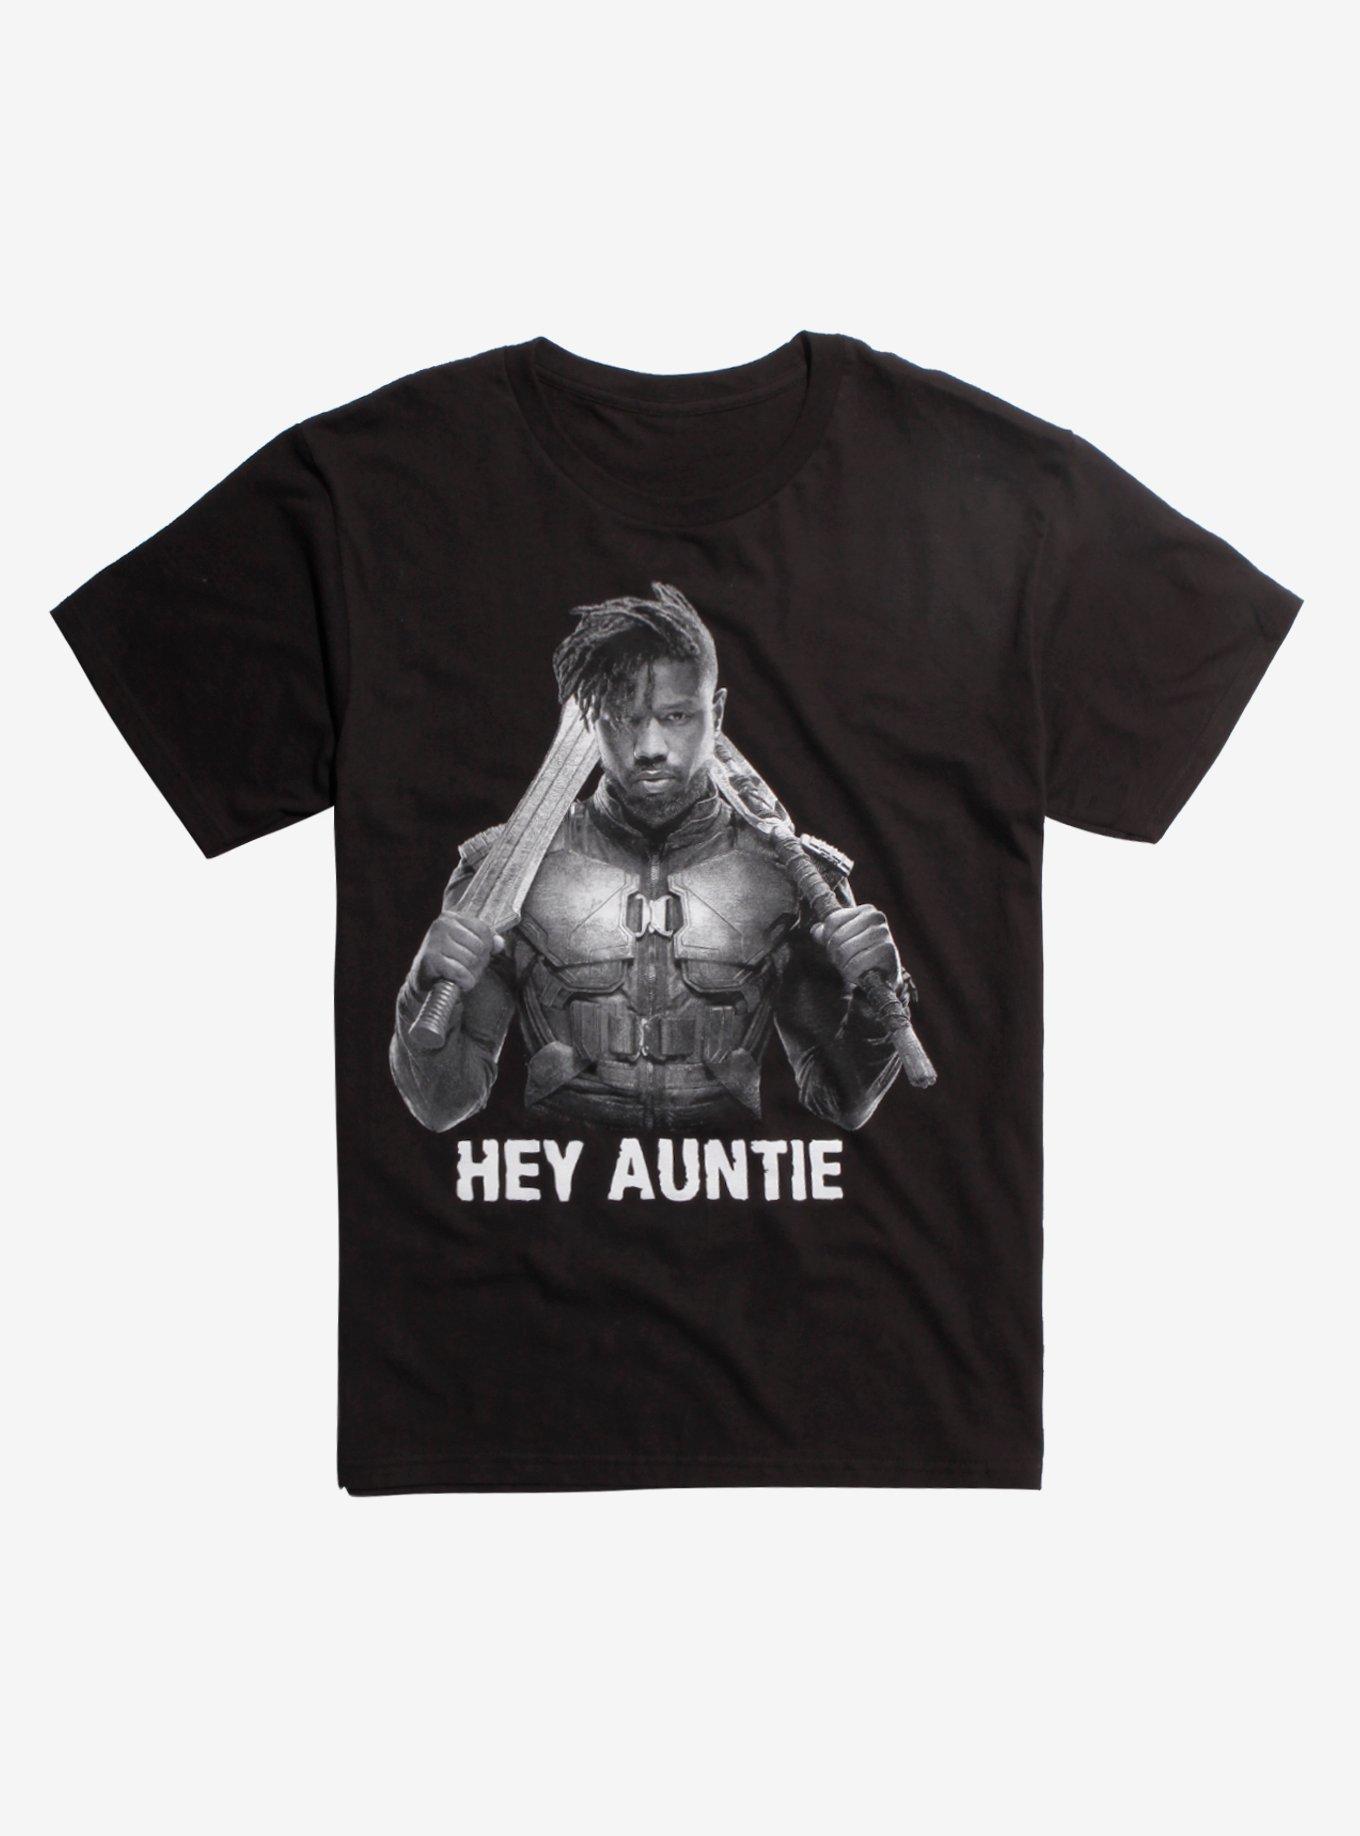 Marvel Black Panther Killmonger Hey Auntie T-Shirt Hot Topic Exclusive, BLACK, hi-res